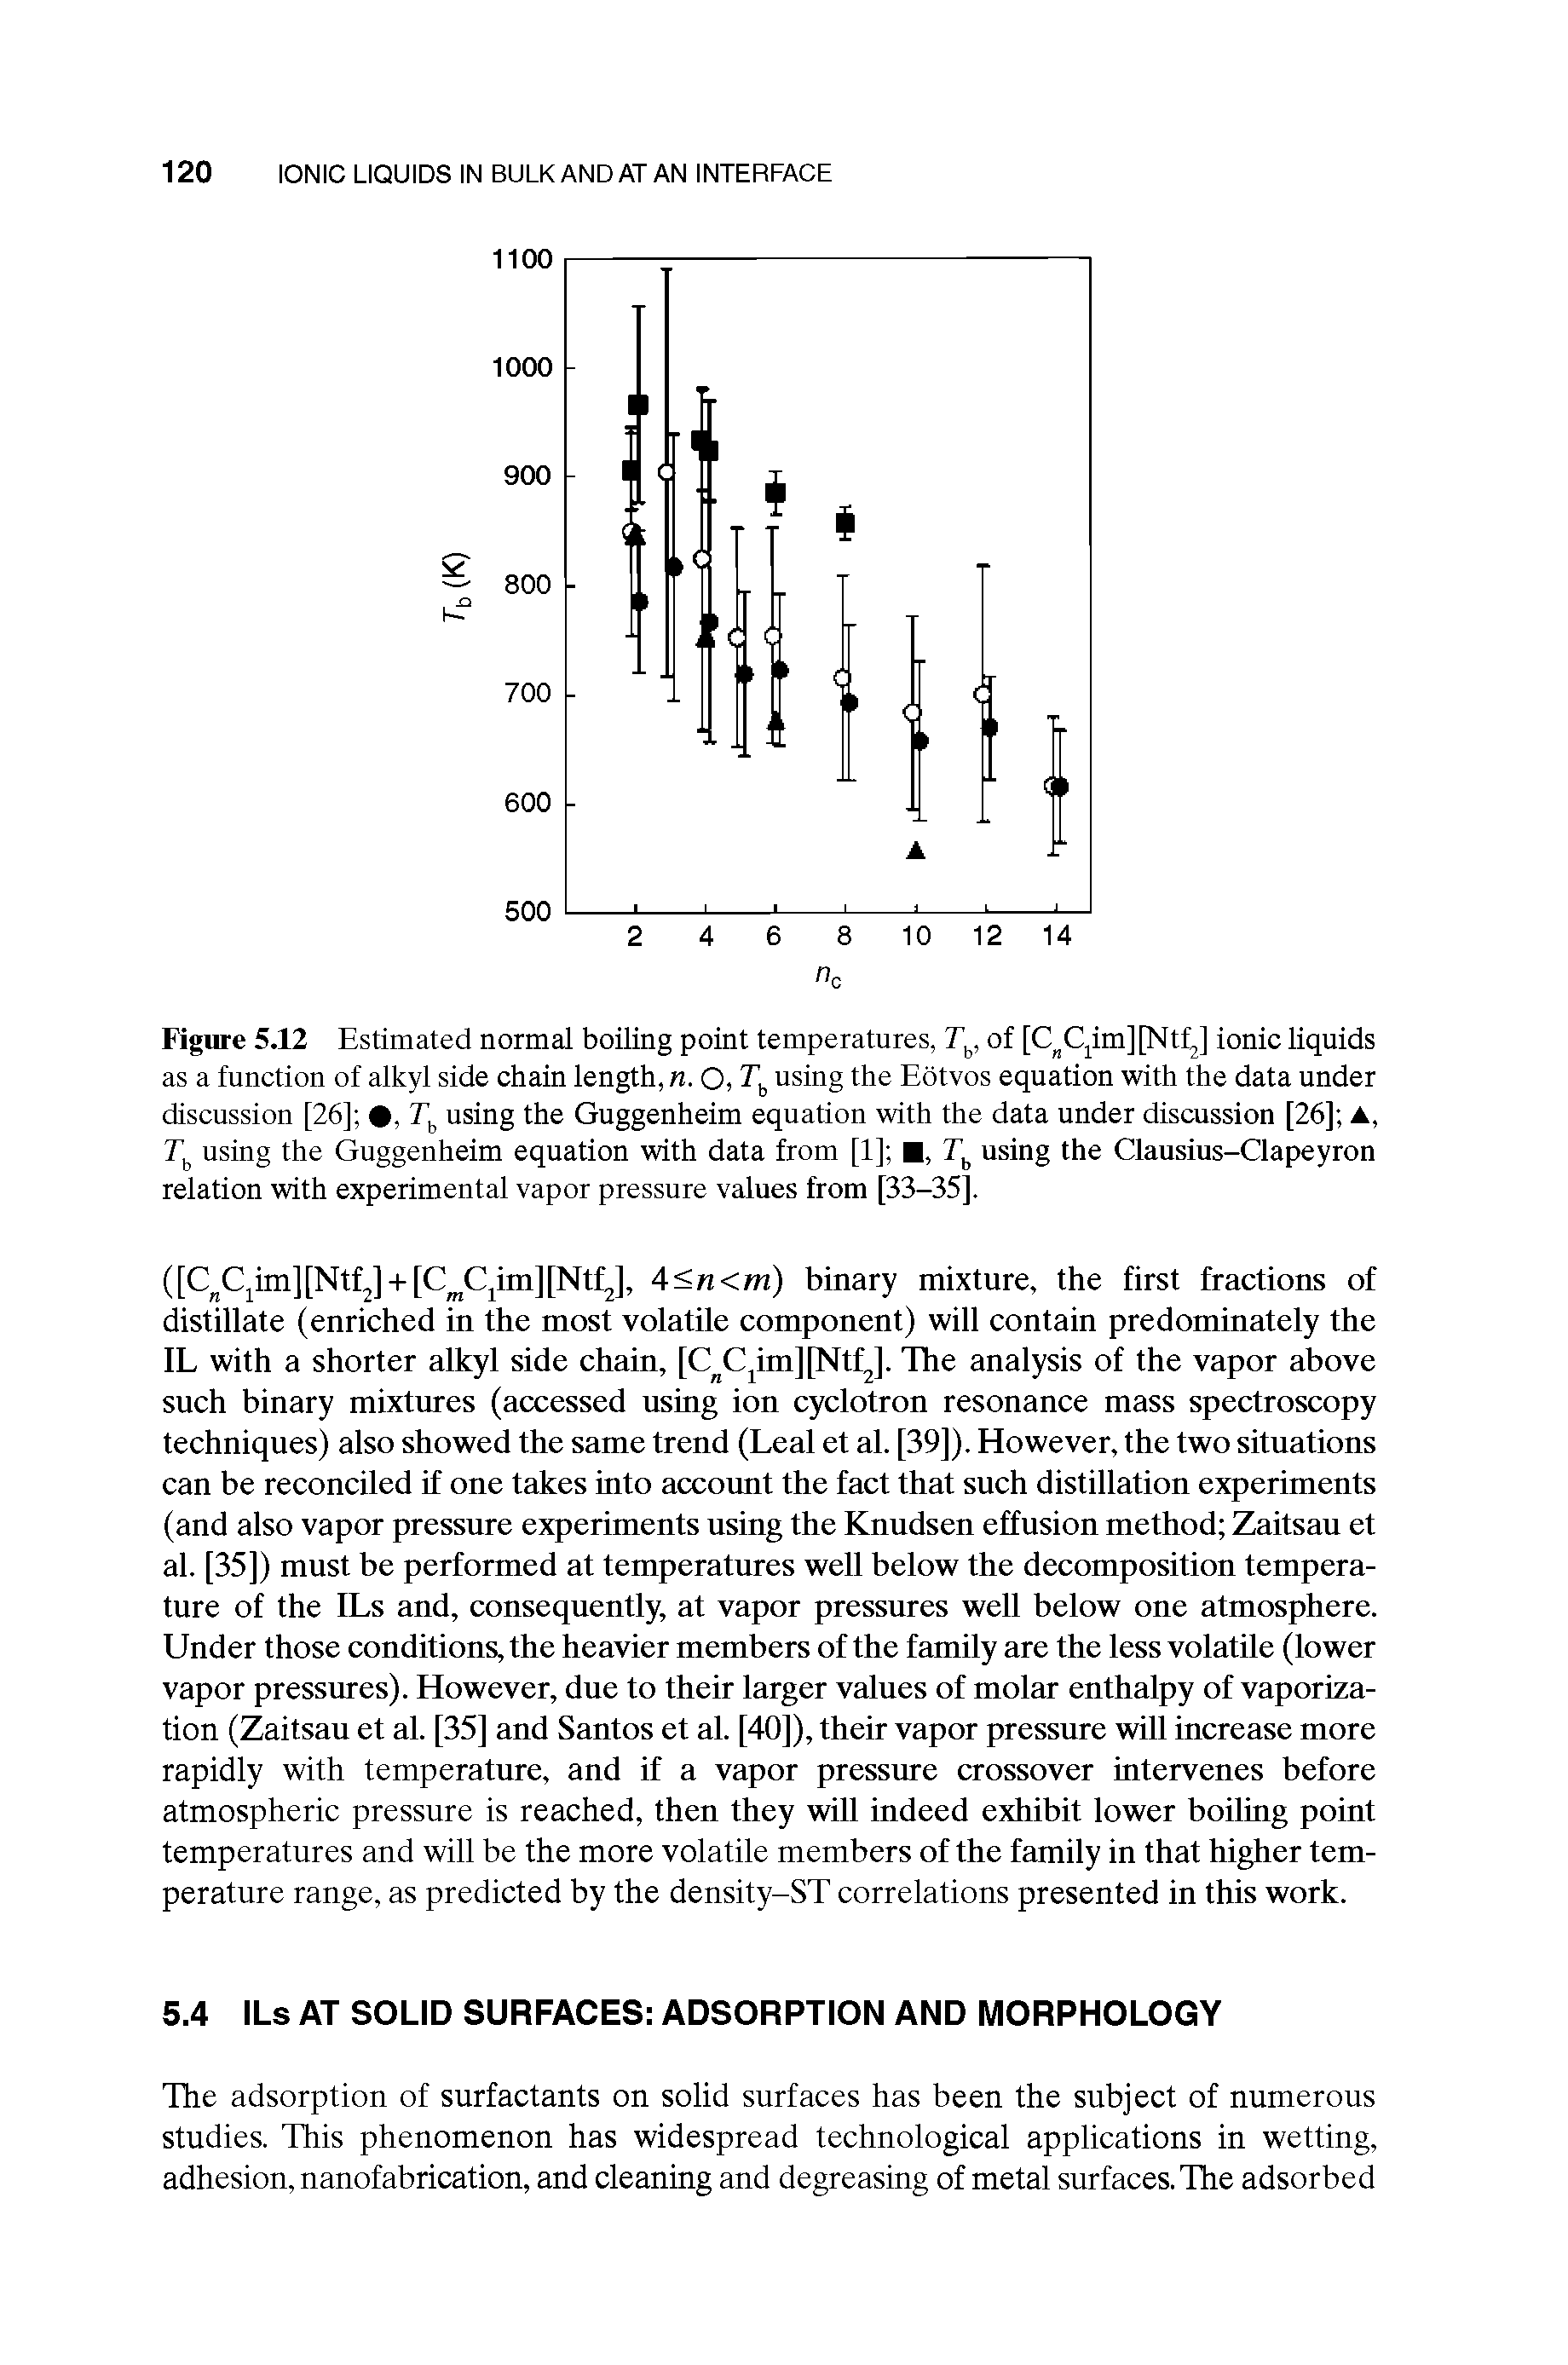 Figure 5.12 Estimated normal boiling point temperatures, of [C Cjim][Nty ionic liquids as a function of alkyl side chain length, n. O, 3" using the Eotvos equation with the data under discussion [26] , using the Guggenheim equation with the data under discussion [26] A, using the Guggenheim equation with data from [1] , using the Clausius-Clapeyron relation with experimental vapor pressure values from [33-35].